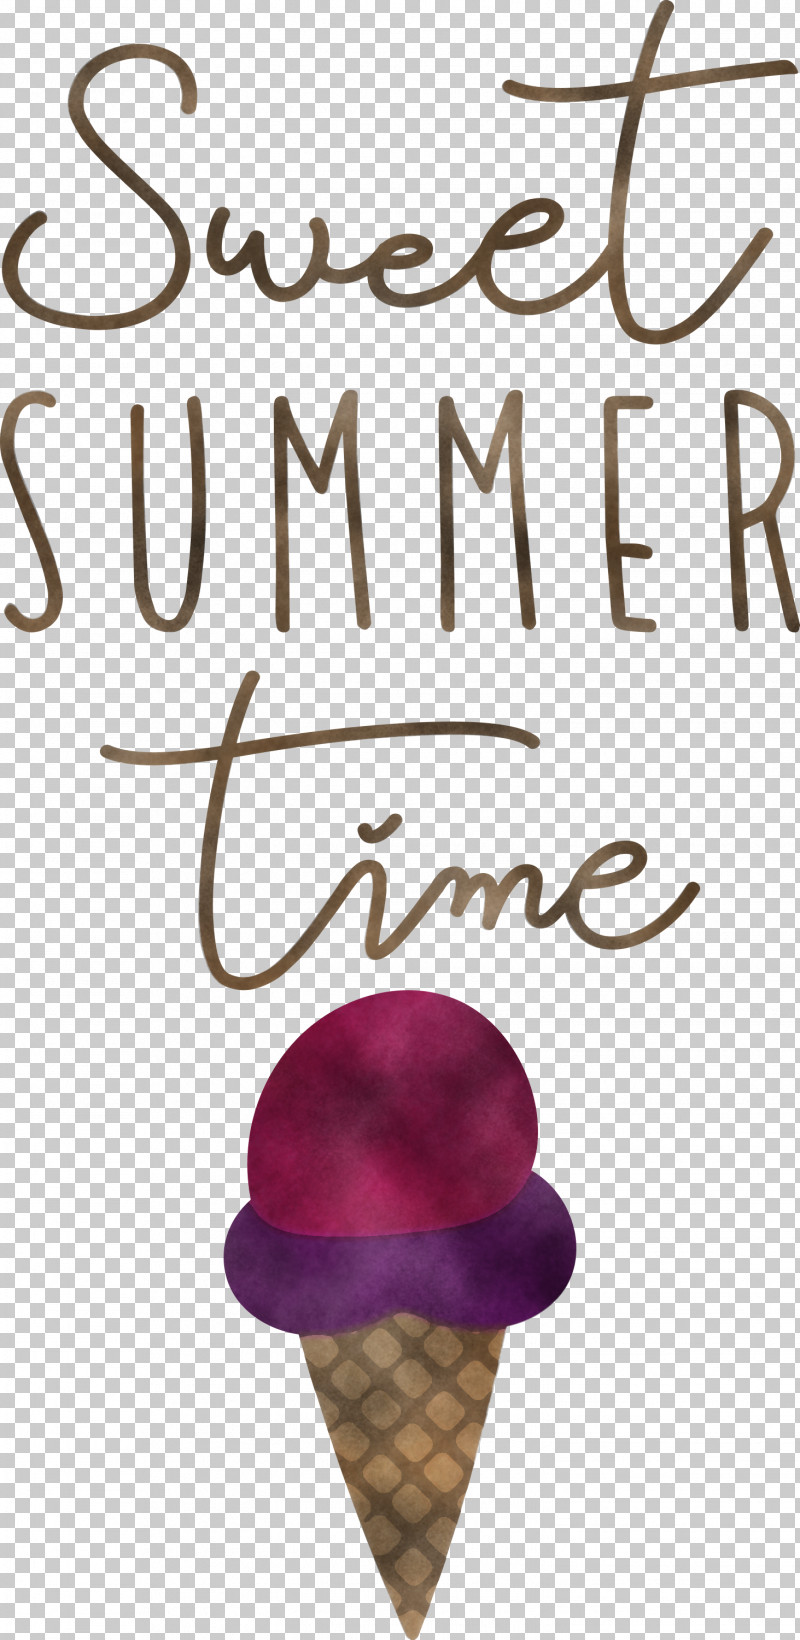 Sweet Summer Time Summer PNG, Clipart, Cone, Geometry, Ice, Ice Cream, Ice Cream Cone Free PNG Download